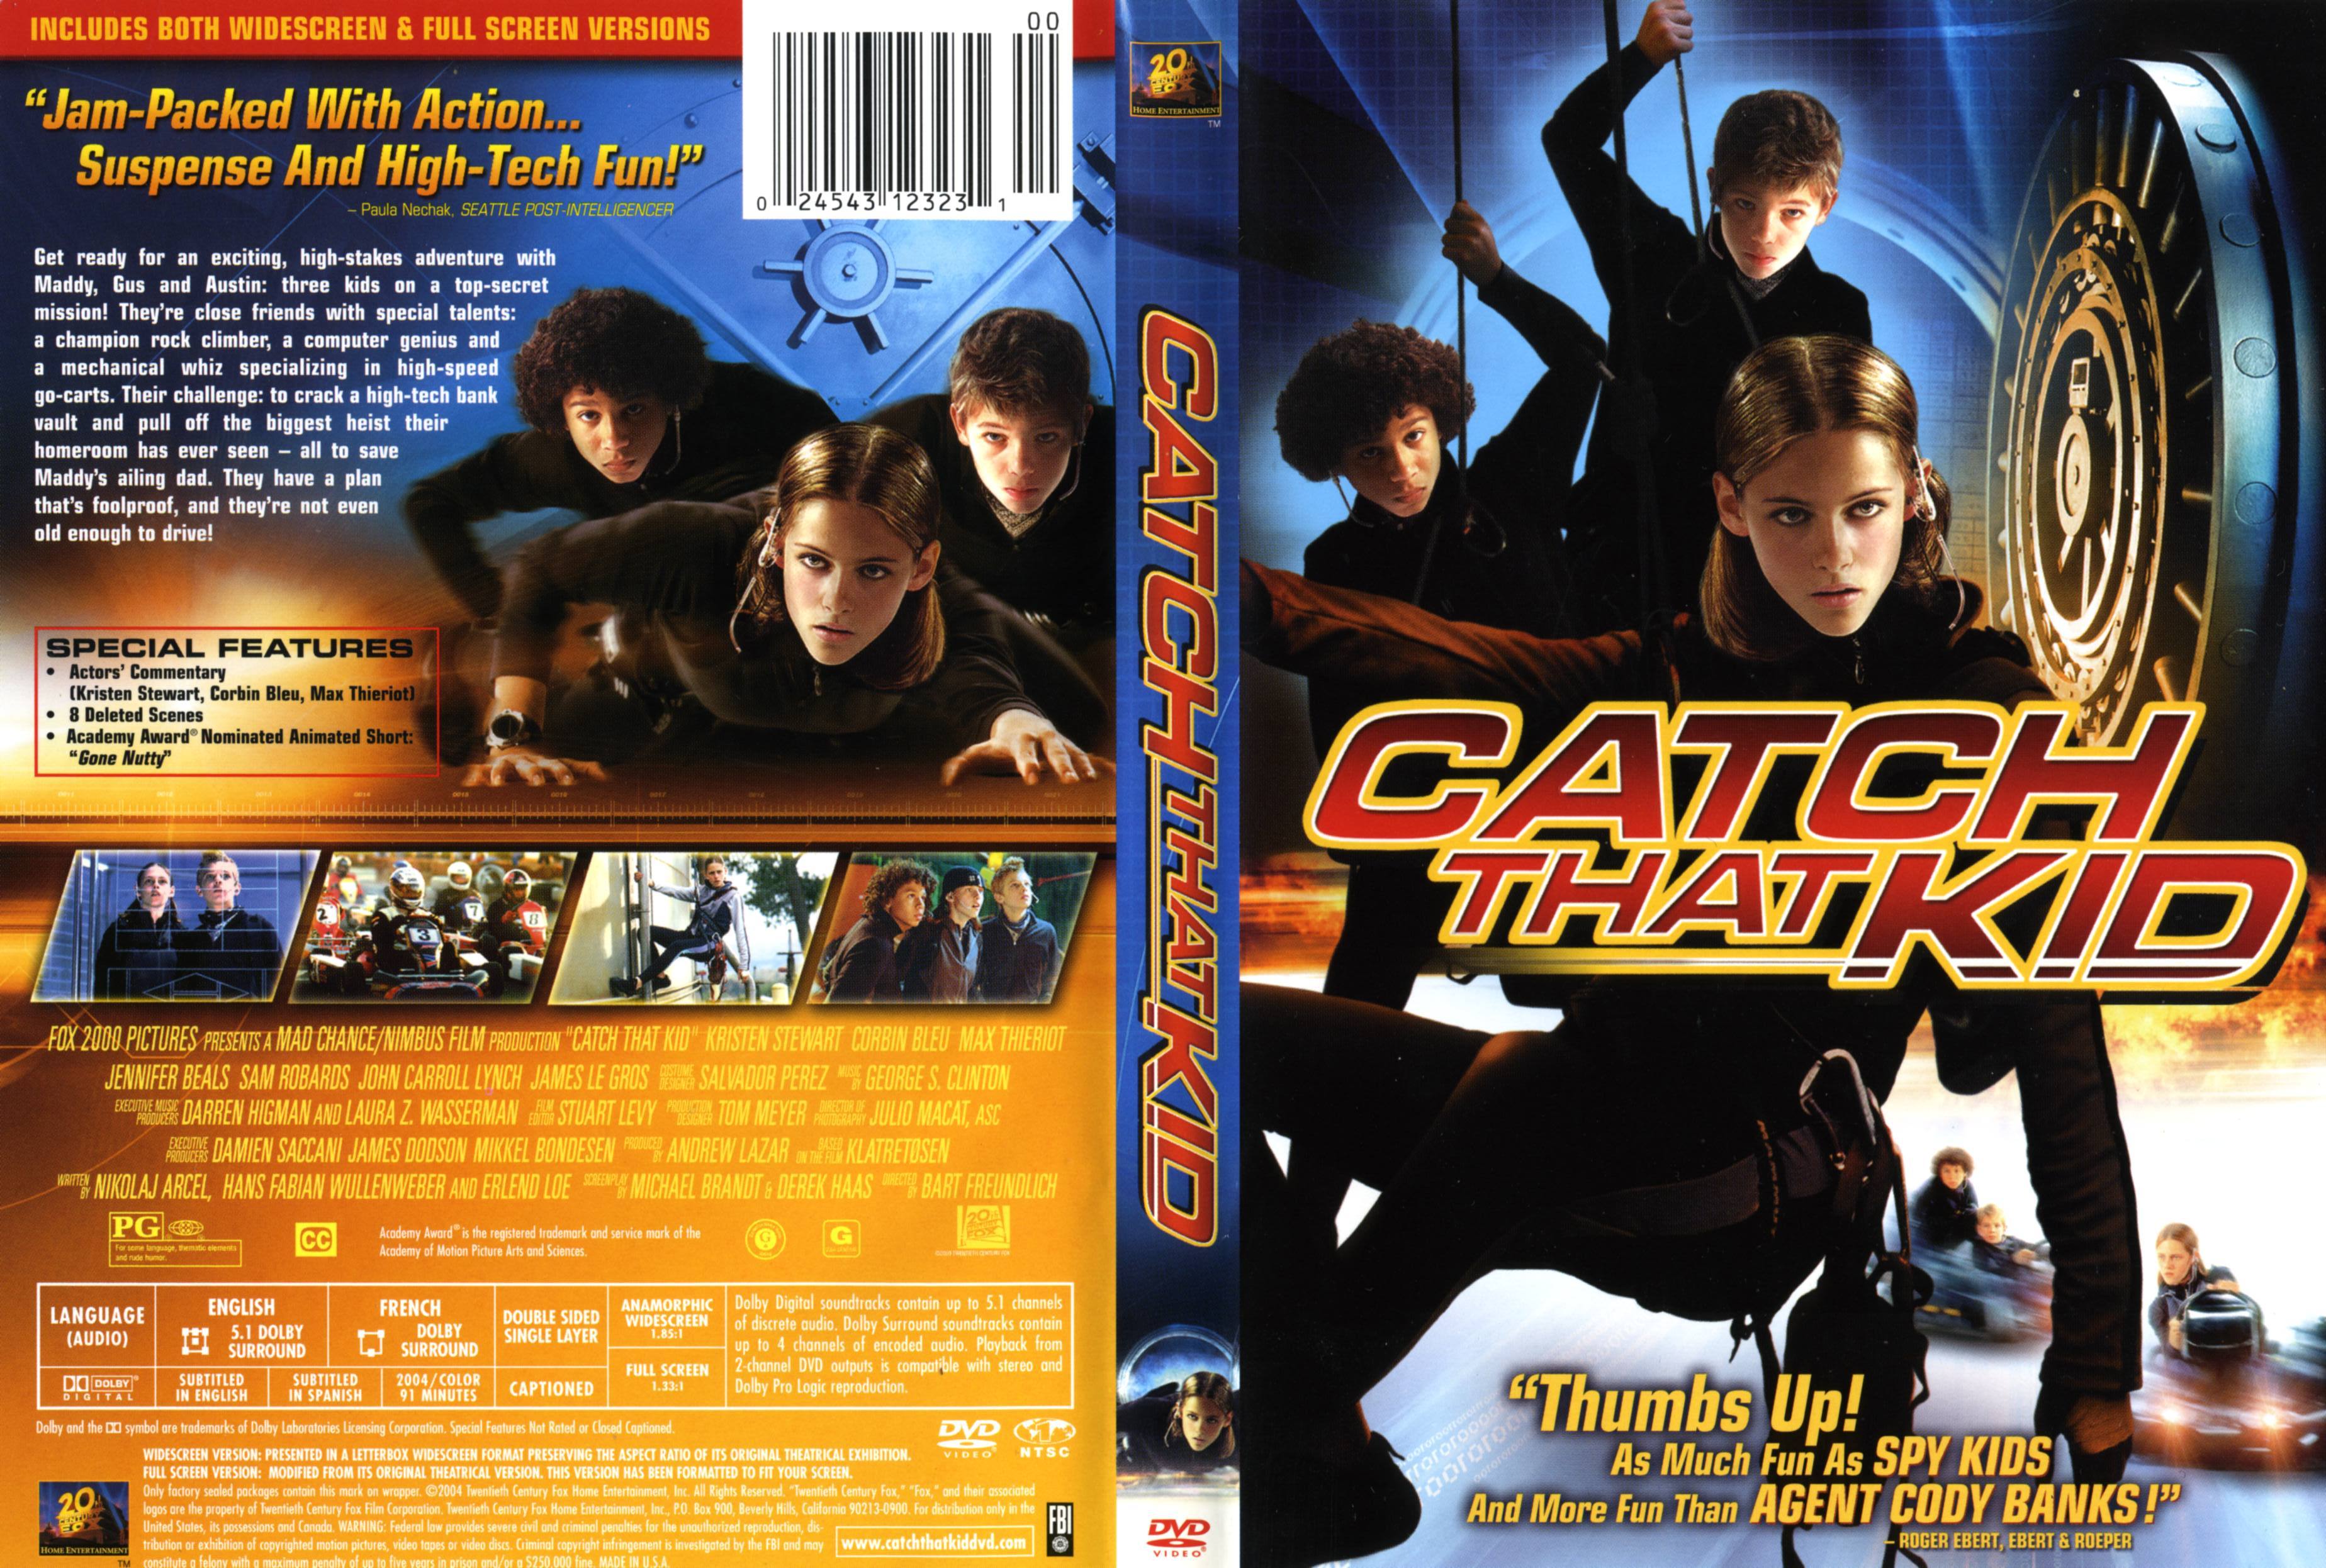 Jaquette DVD Catch That Kid Zone 1